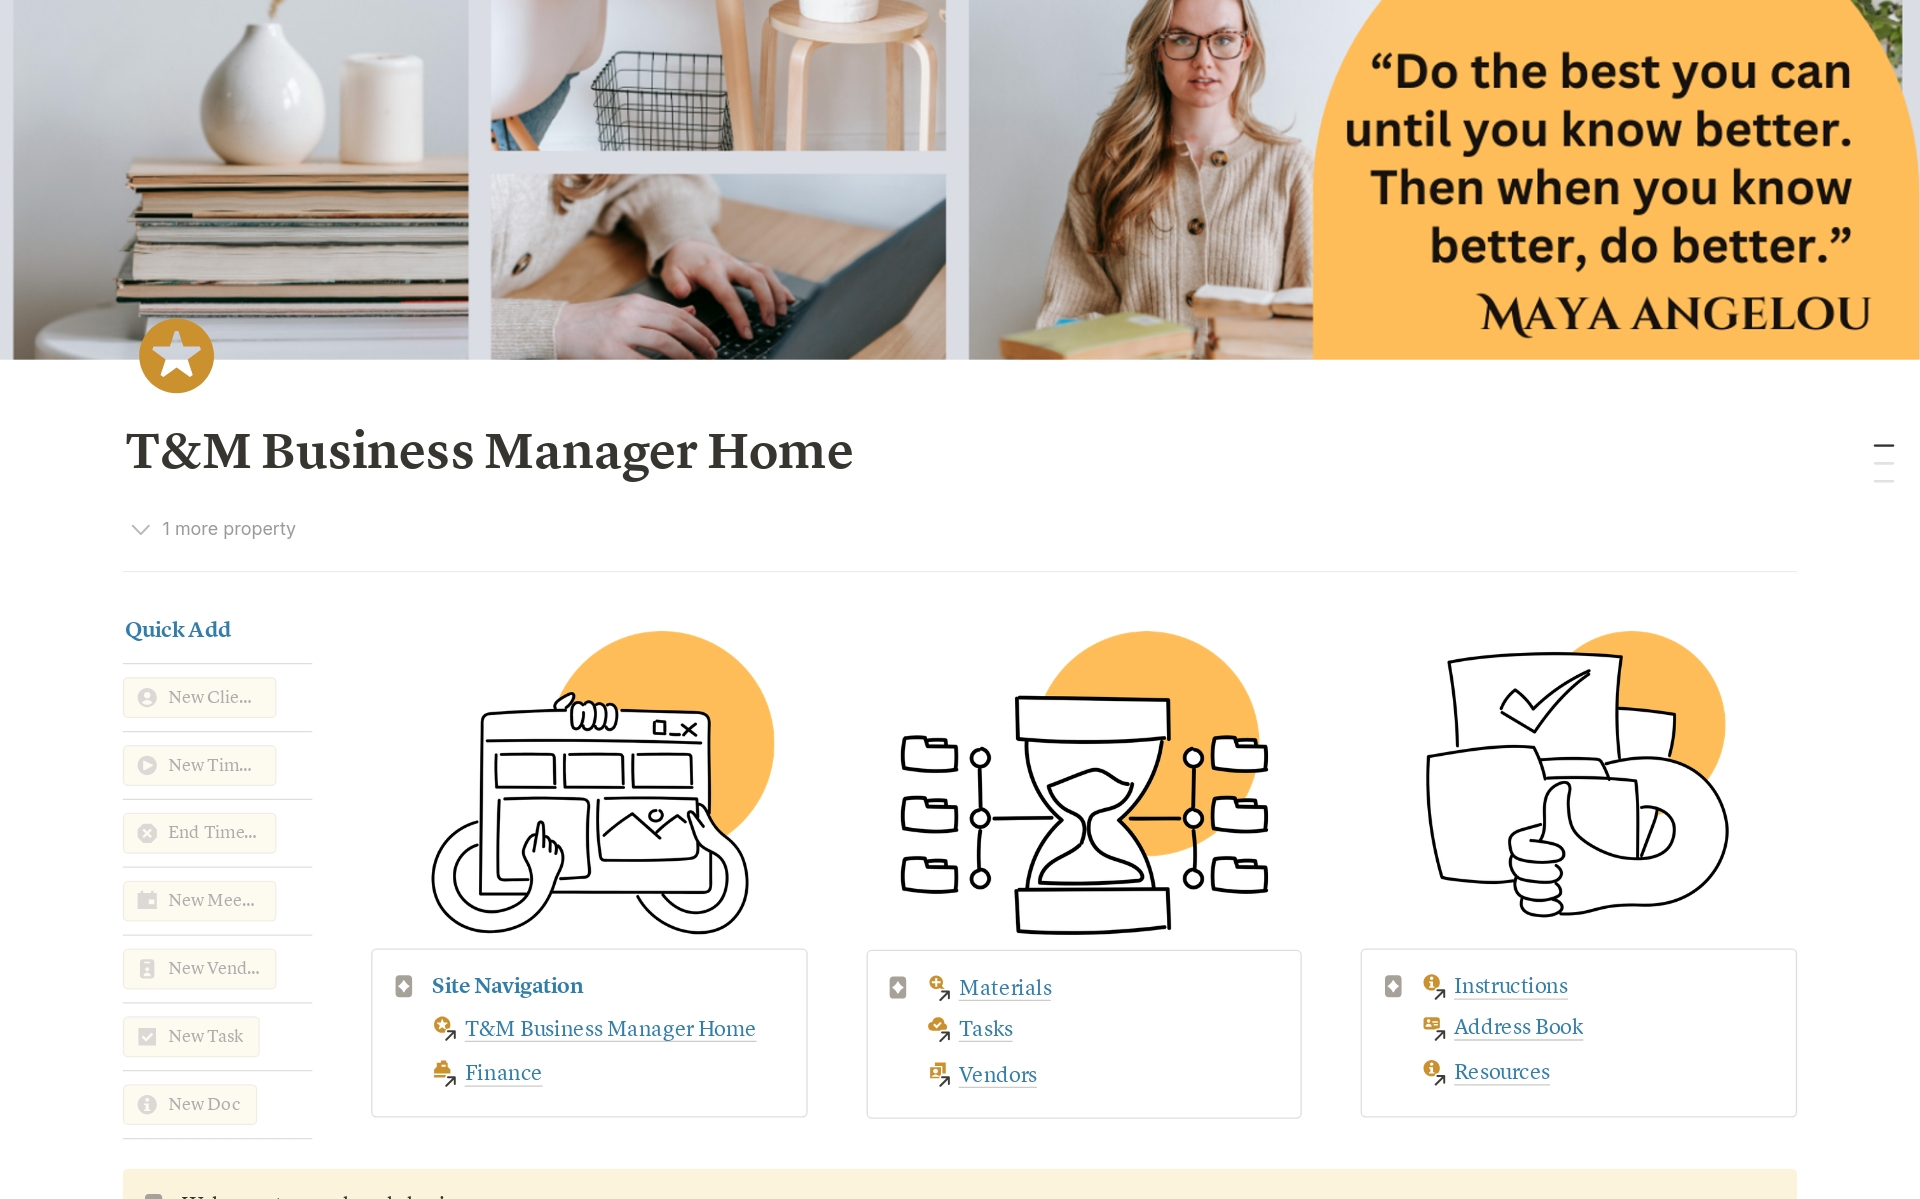 Our hourly freelancer business manager is essential for consultants. It includes a beautifully designed Notion planner, services business manager template, and an intuitive client portal. This feminine and approachable planner simplifies managing your freelance business.